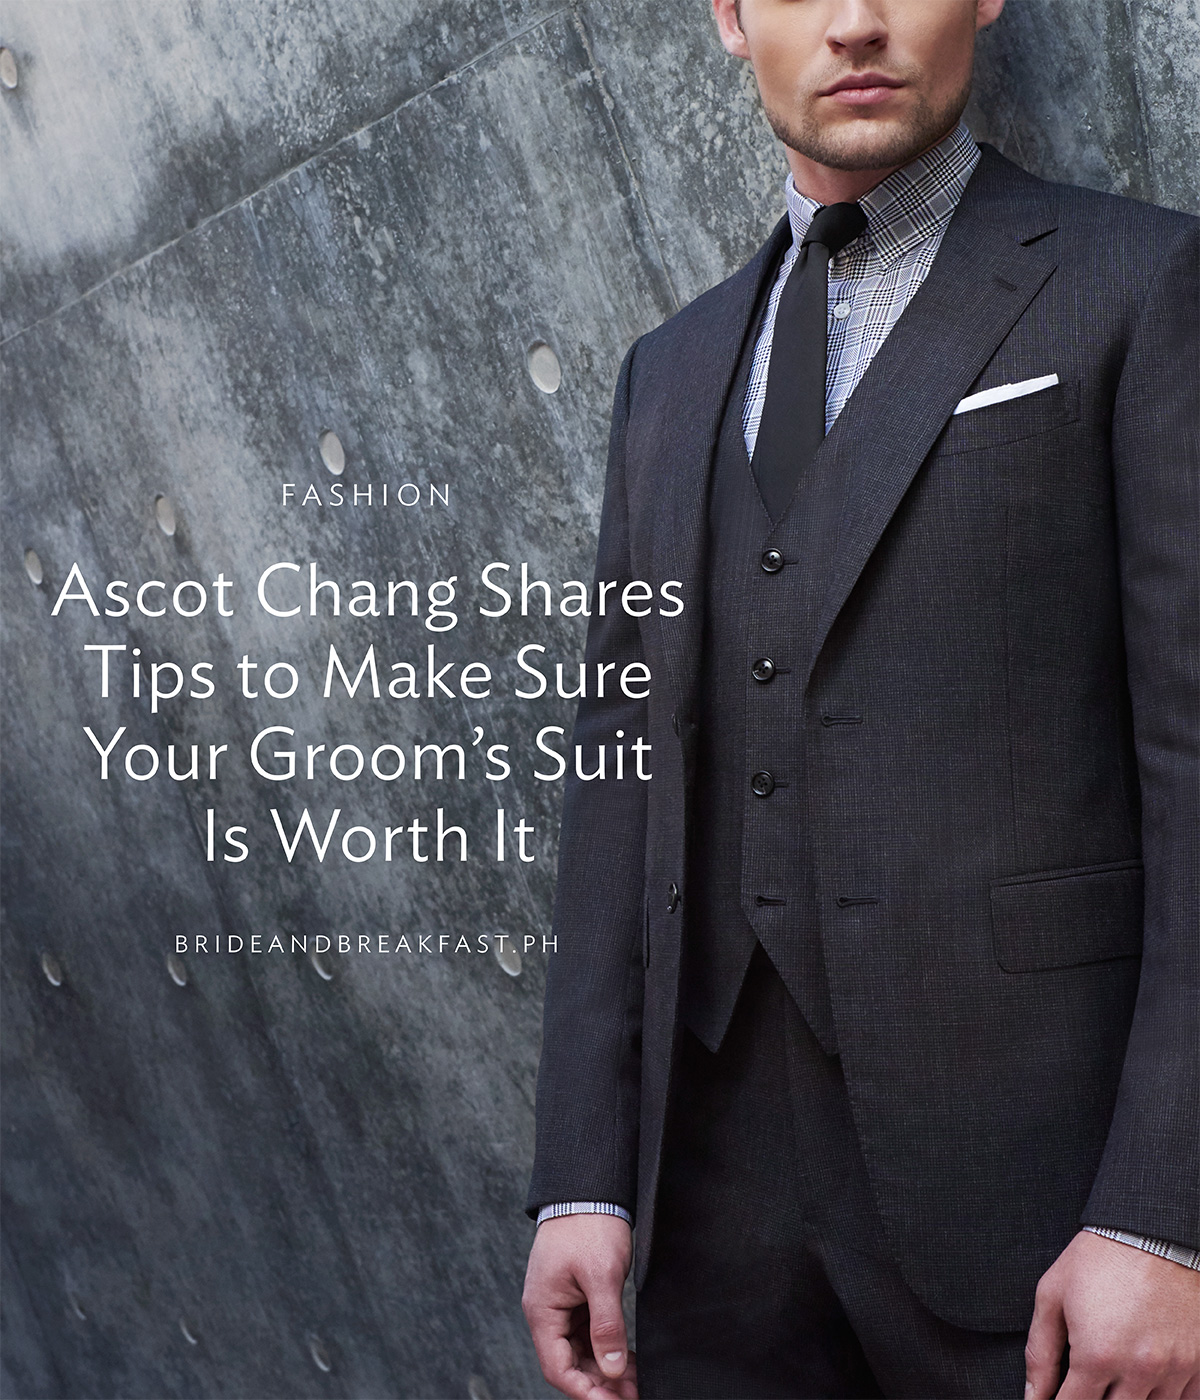 Ascot Chang Shares Tips to Make Sure Your Groom's Suit Is Worth It